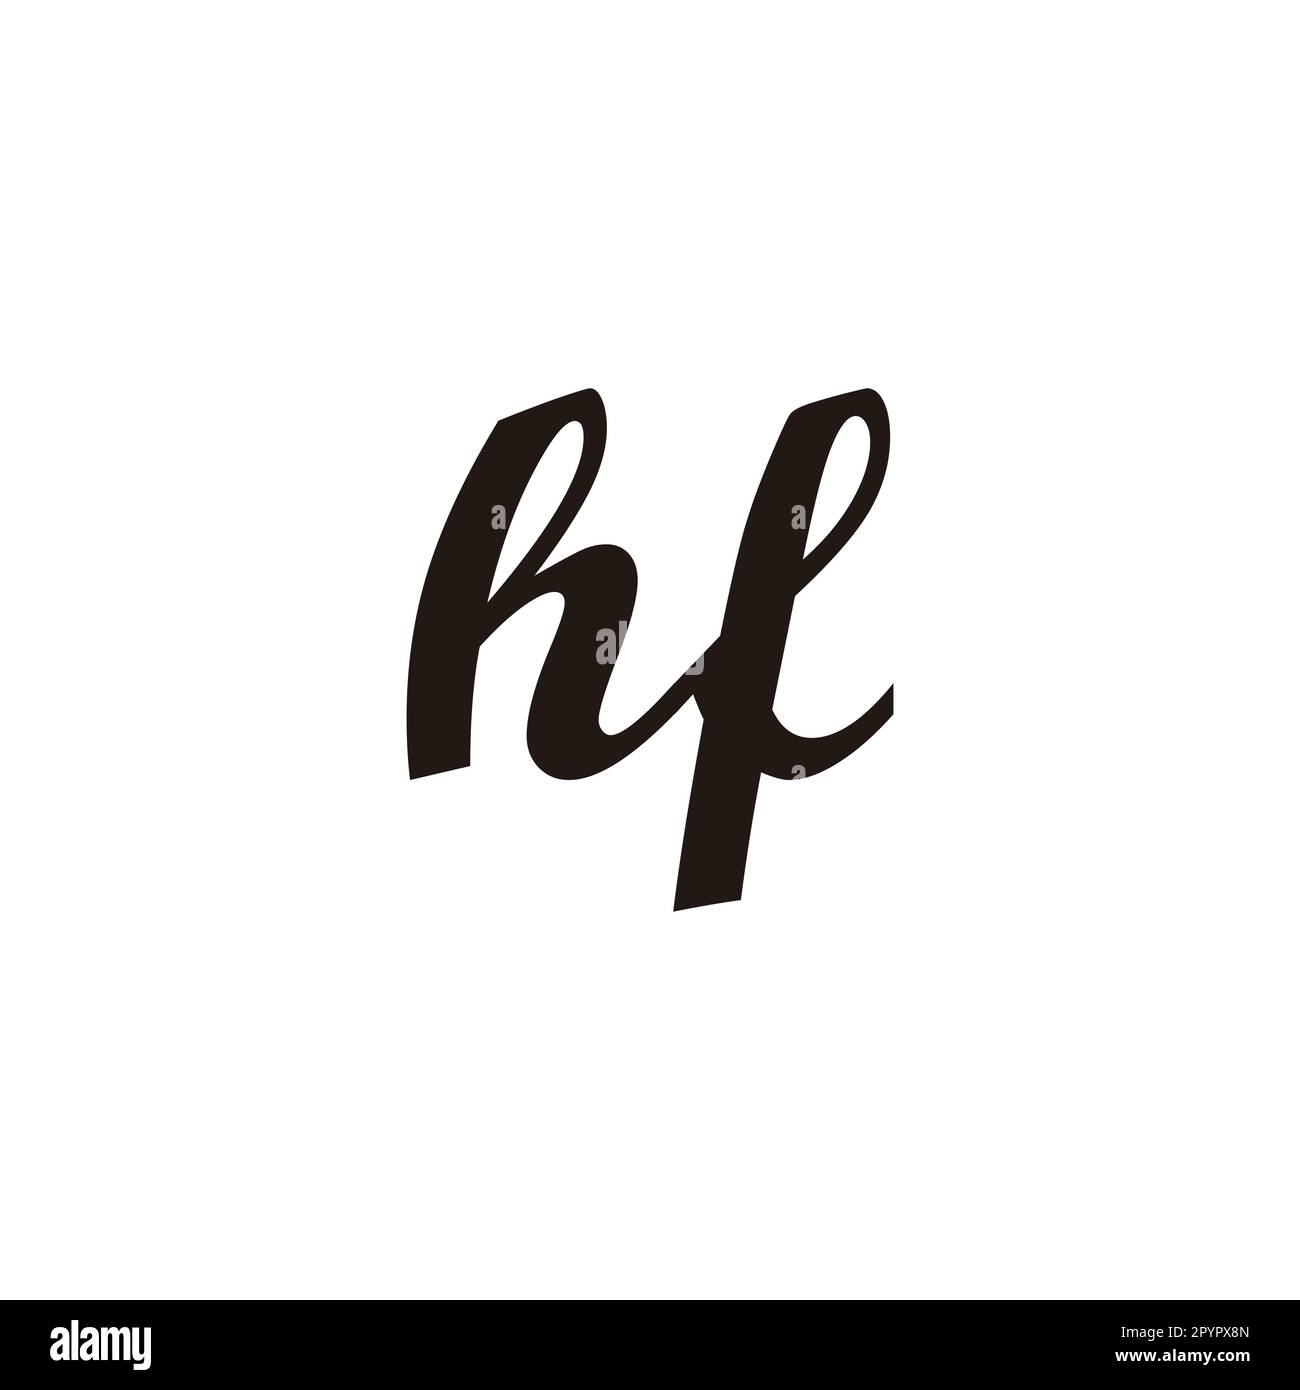 Letter hf connect geometric symbol simple logo vector Stock Vector